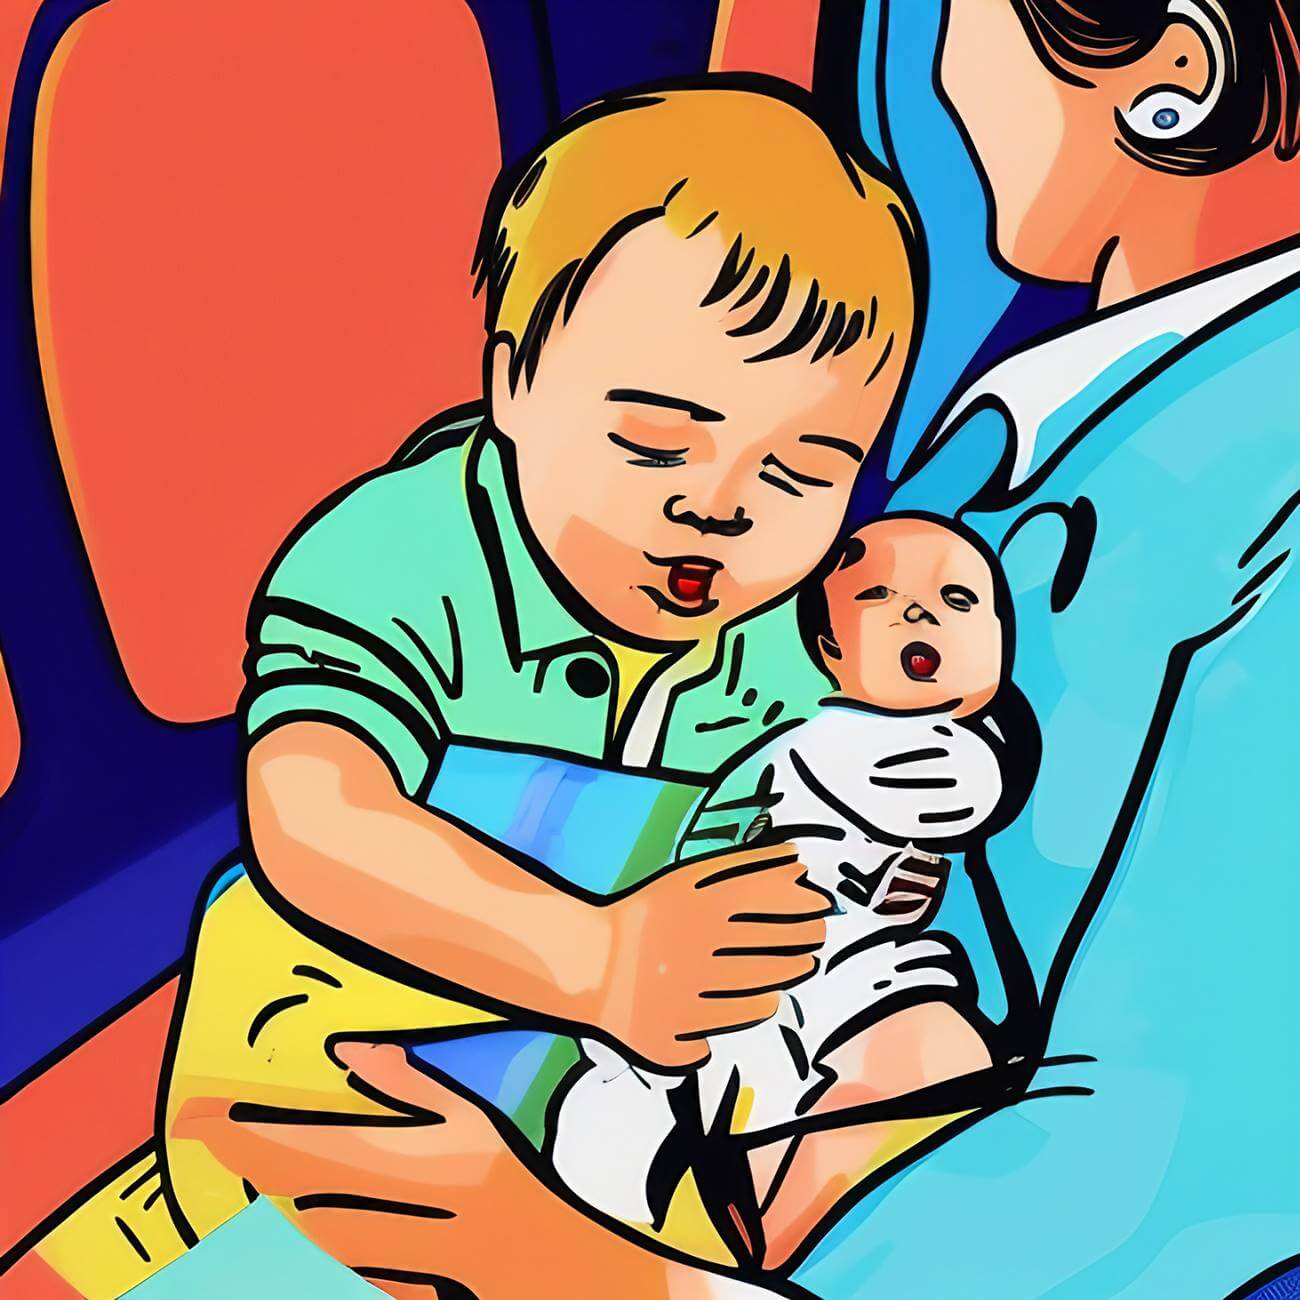 taking care of babies inside a plane